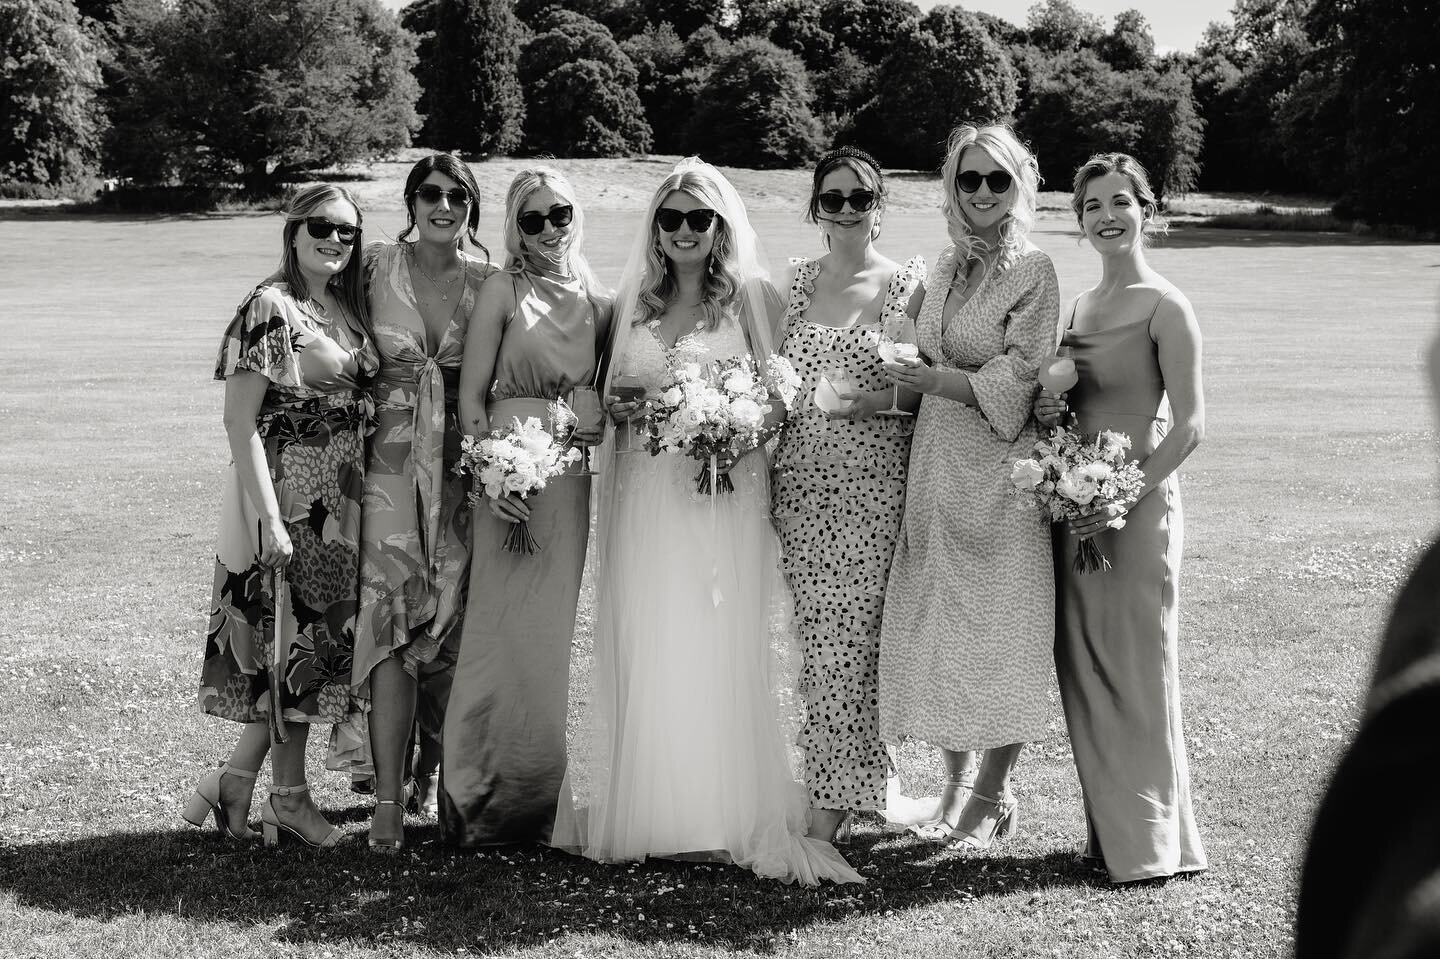 I feel so incredibly lucky to be surrounded by amazing women who are friends, family and fellow industry babes. Happy international women&rsquo;s day 💃🏼
.
.
.
@agnes.black @newburghpriory
.
.
.
#newburghpriory #newburghpriorywedding #internationalw